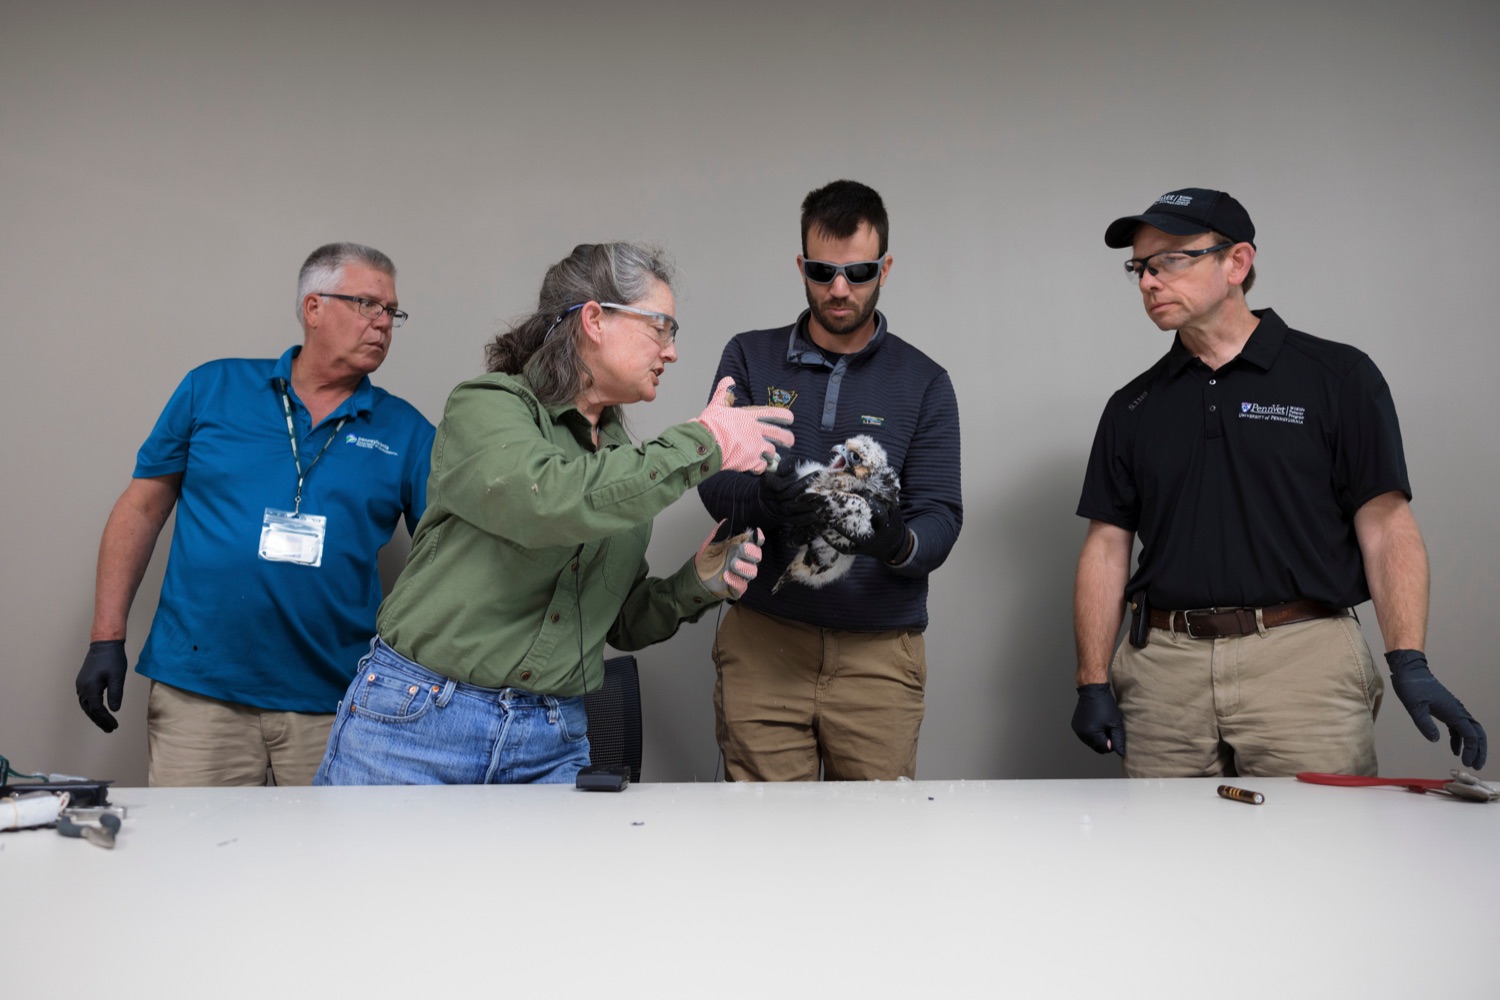 Bert Myers, Director of Environmental Education for PA Dept. of Environmental Protection, left, Patti Barber, Endangered Bird Specialist with the PA Game Commission, center left, University of Pennsylvania School of Veterinary Medicines Ian Gereg, wildlife health technician, center right, and Scott Larson, wildlife veterinarian, check the health of a peregrine falcon nestling inside the Rachel Carson State Office Building on Wednesday, June 7, 2023. Banding the falcons allows biologists and birdwatchers from all over the continent to track the birds and help us learn more about where they travel, how long theyve lived, and whether they'll establish new nests in other places. Falcons born on the ledge at the Rachel Carson building have been tracked to locations from Florida all the way to Canada.<br><a href="https://filesource.amperwave.net/commonwealthofpa/photo/23186_DEP_FalconBanding_NK_007.jpg" target="_blank">⇣ Download Photo</a>